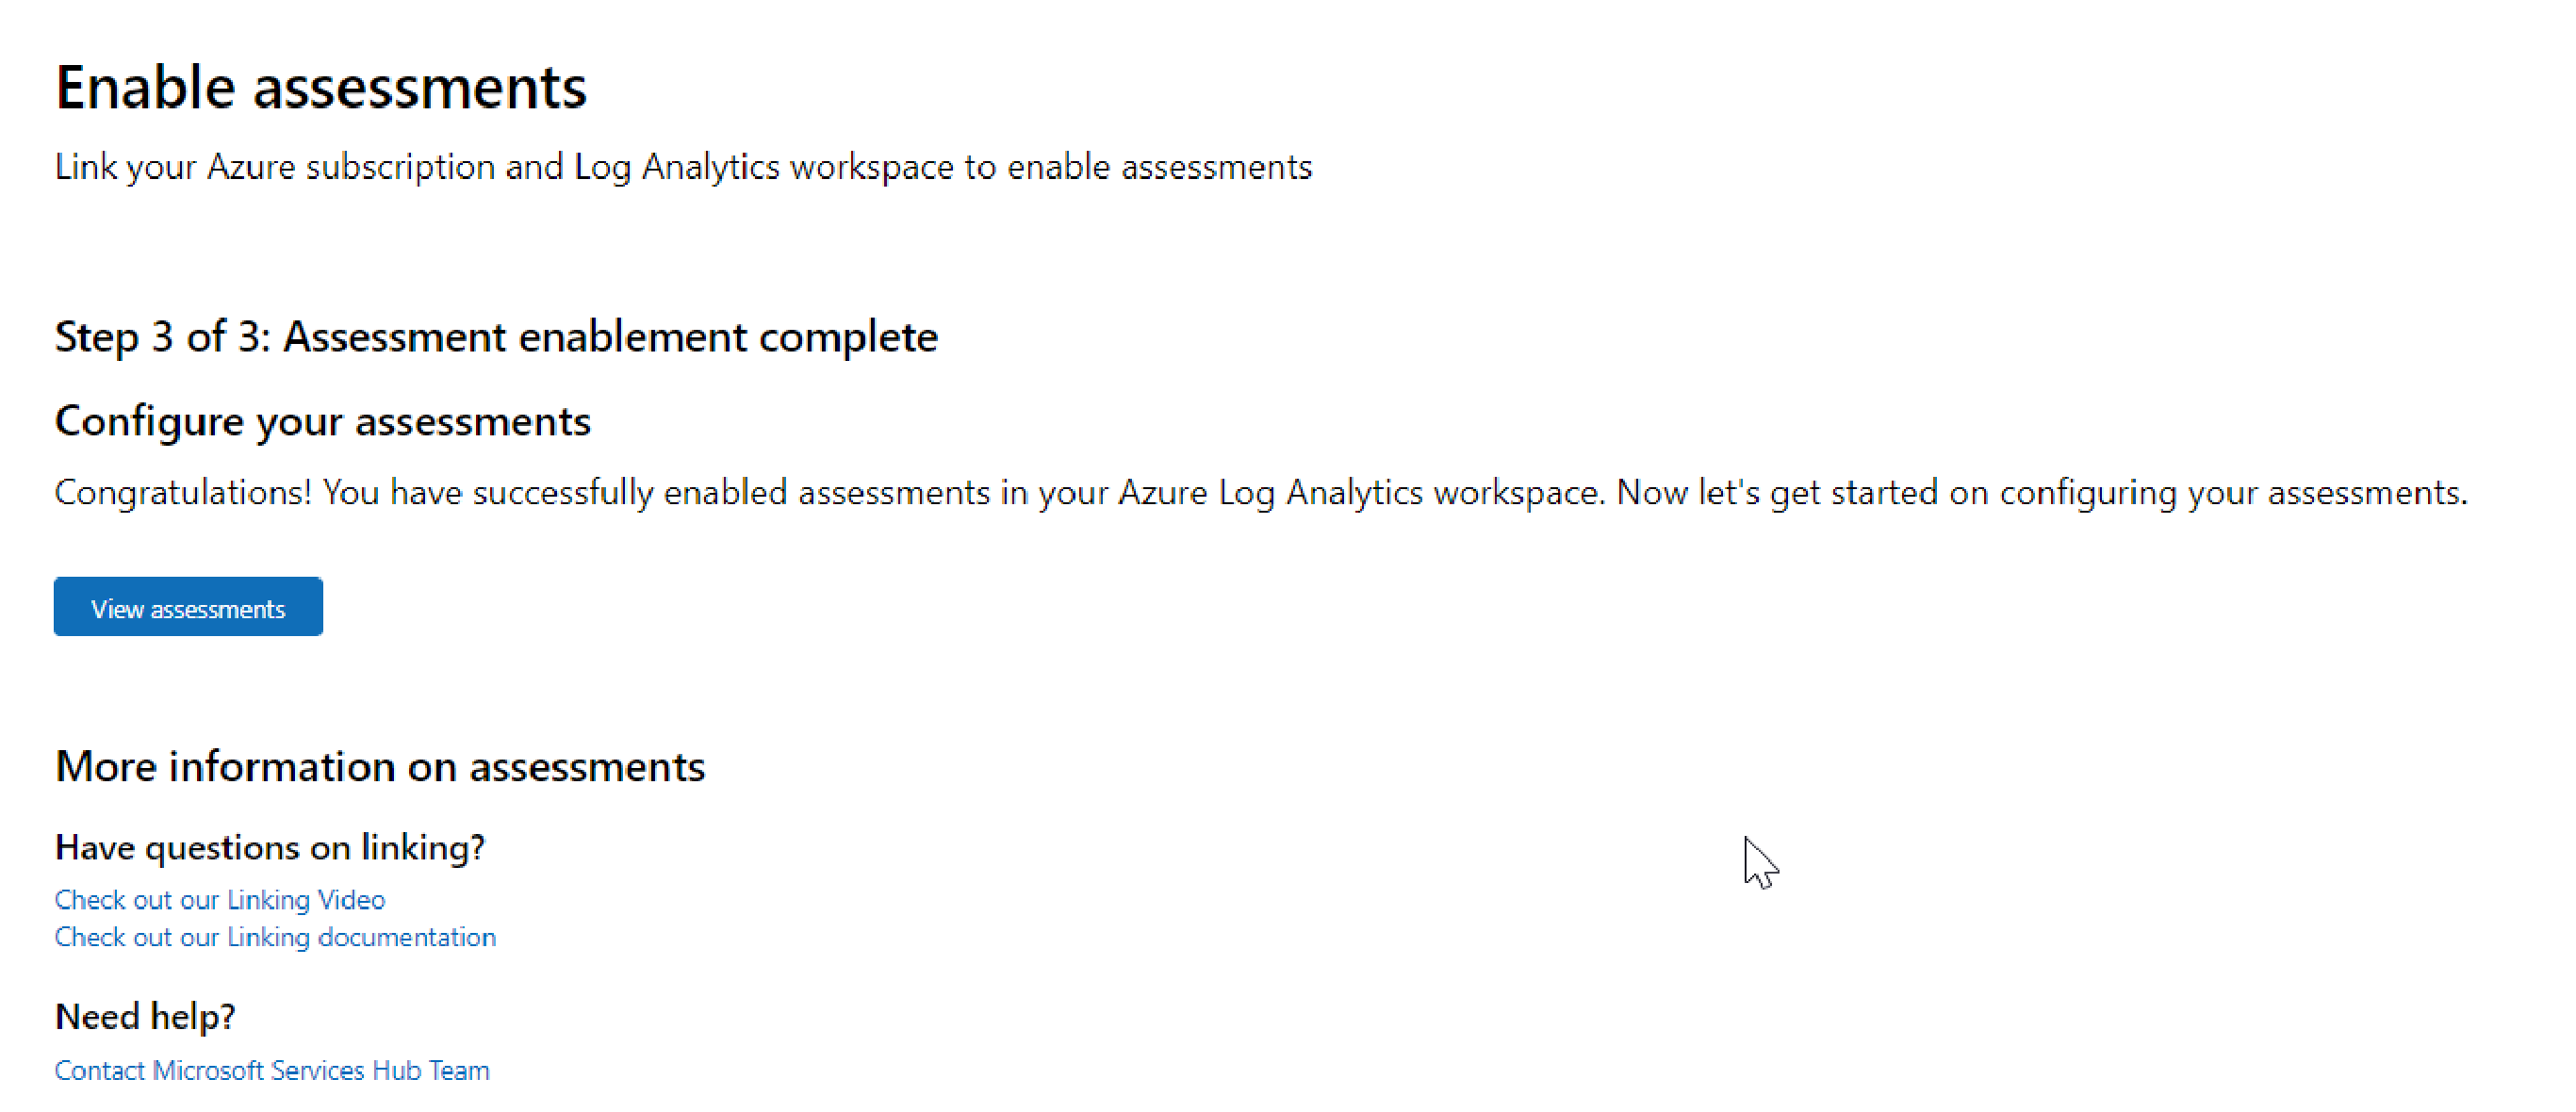 Enable assessments screen, which shows that assessments have been successfully enabled in the AzureLog Analytics workspace.